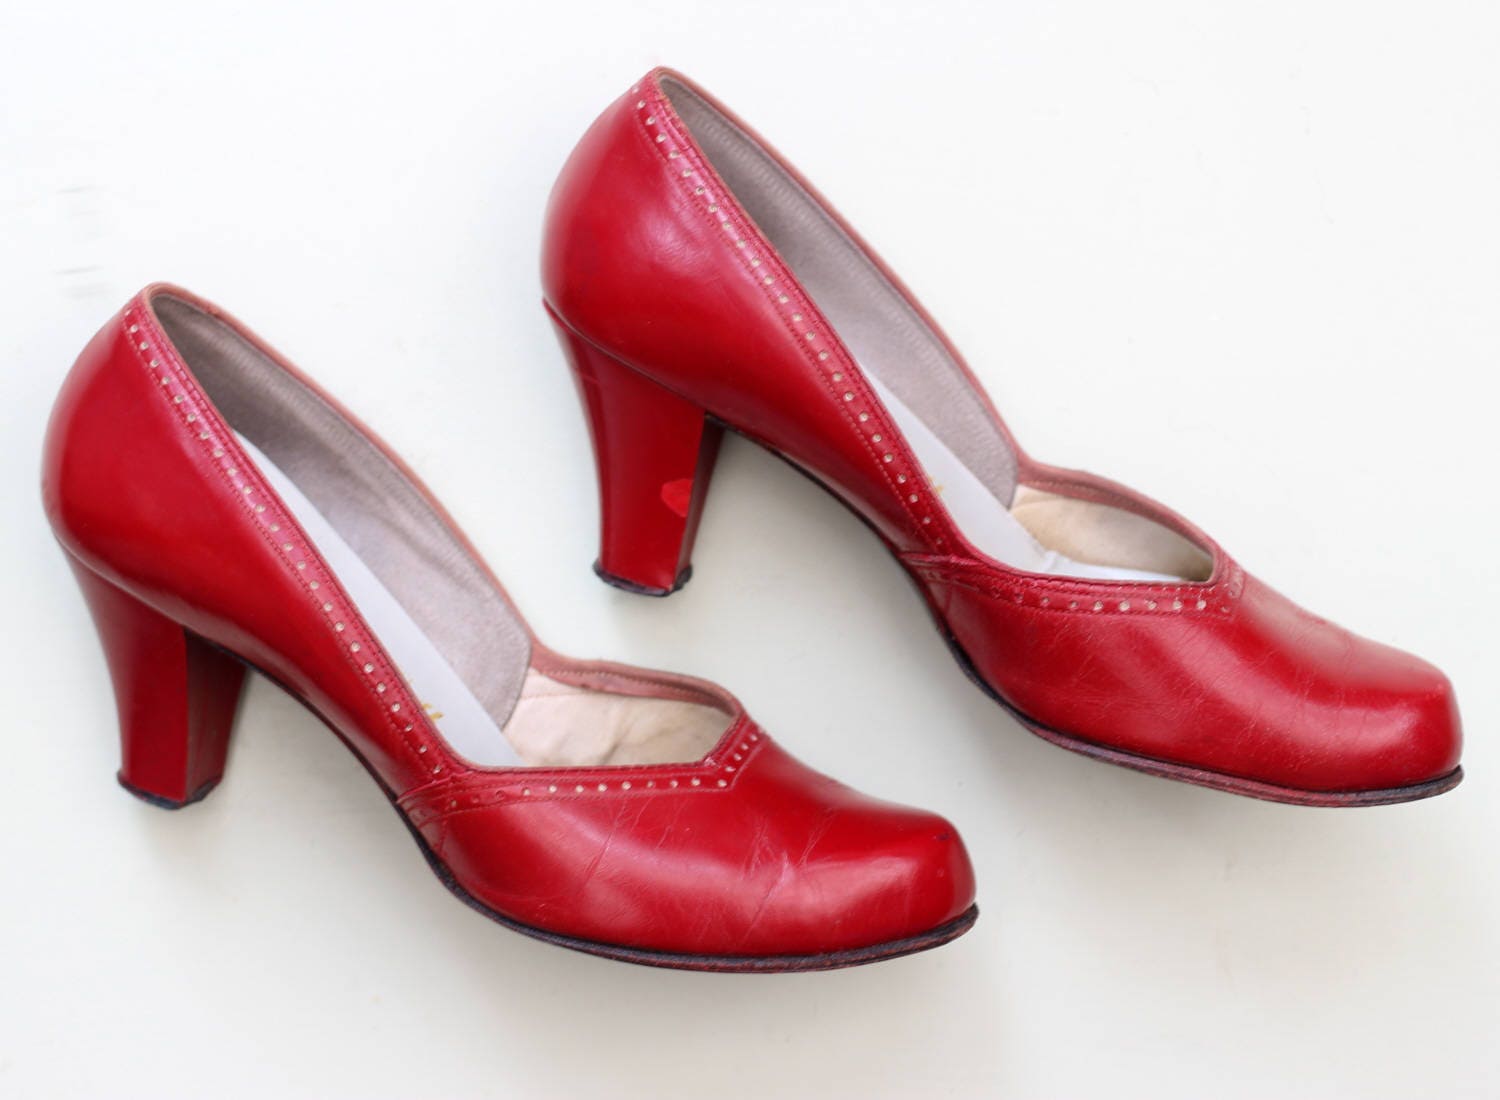 Vintage 1940s Early 1950s Tomato Red Leather Pumps Court Shoes UK 4 US ...